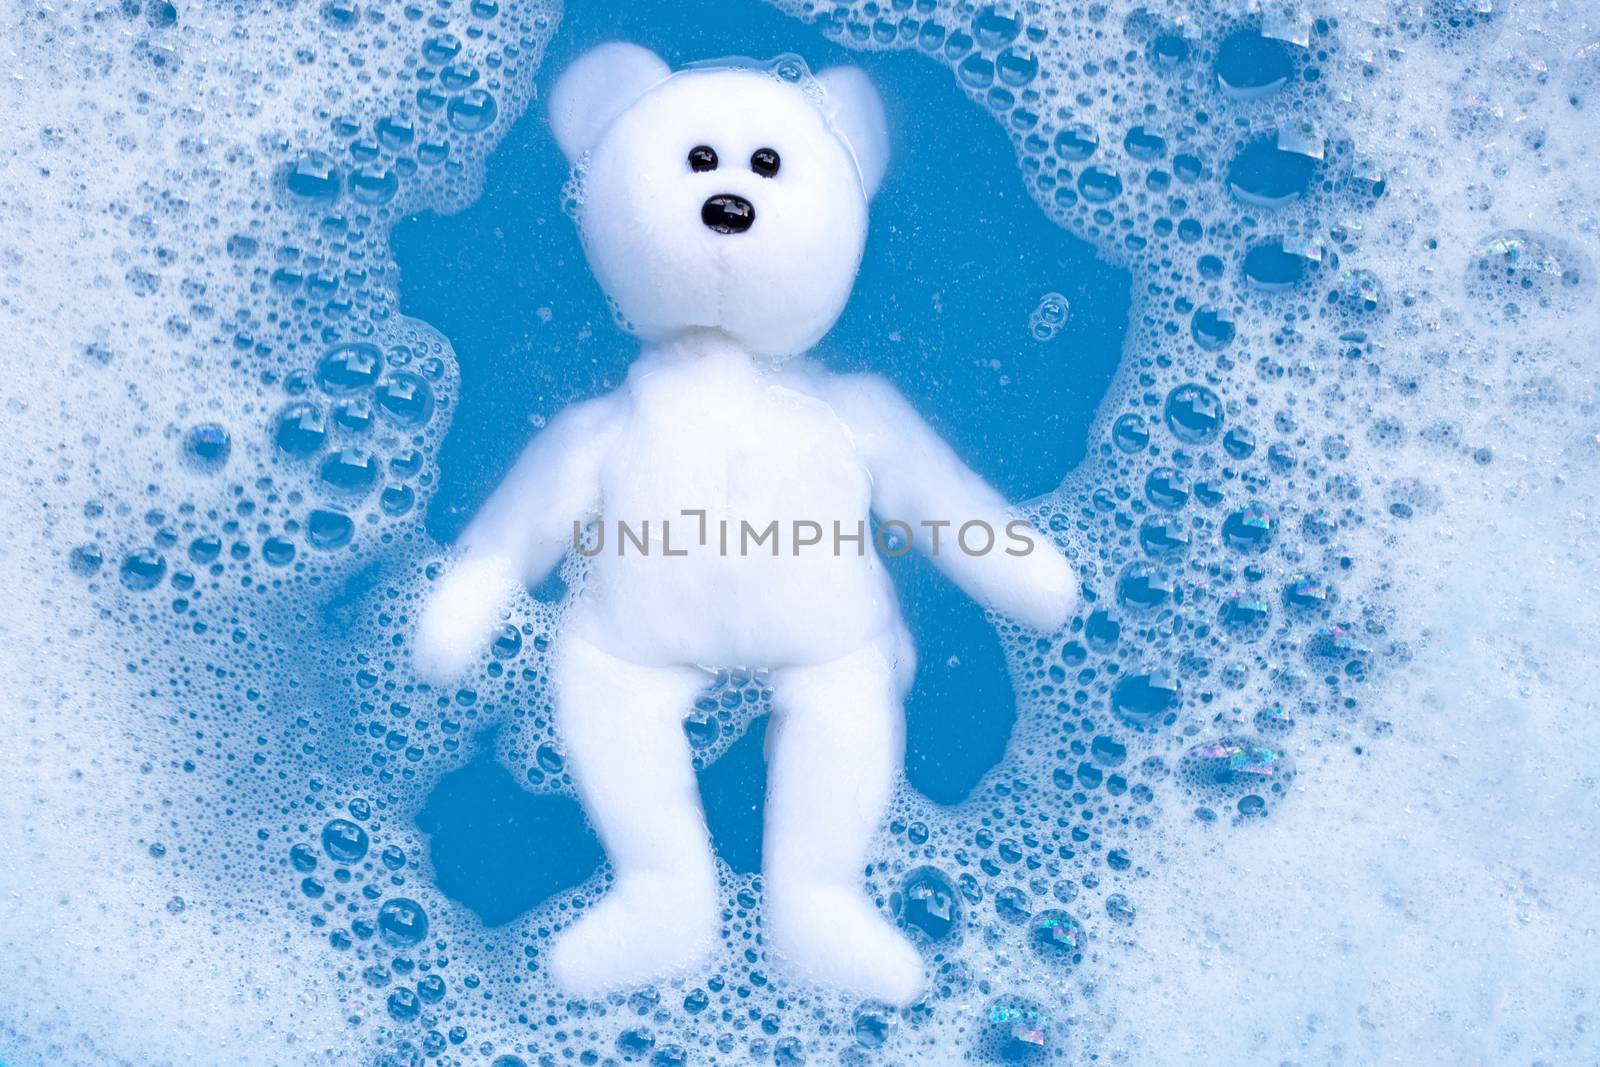 Soaking bear toy in laundry detergent water dissolution before washing. Laundry concept, Top view